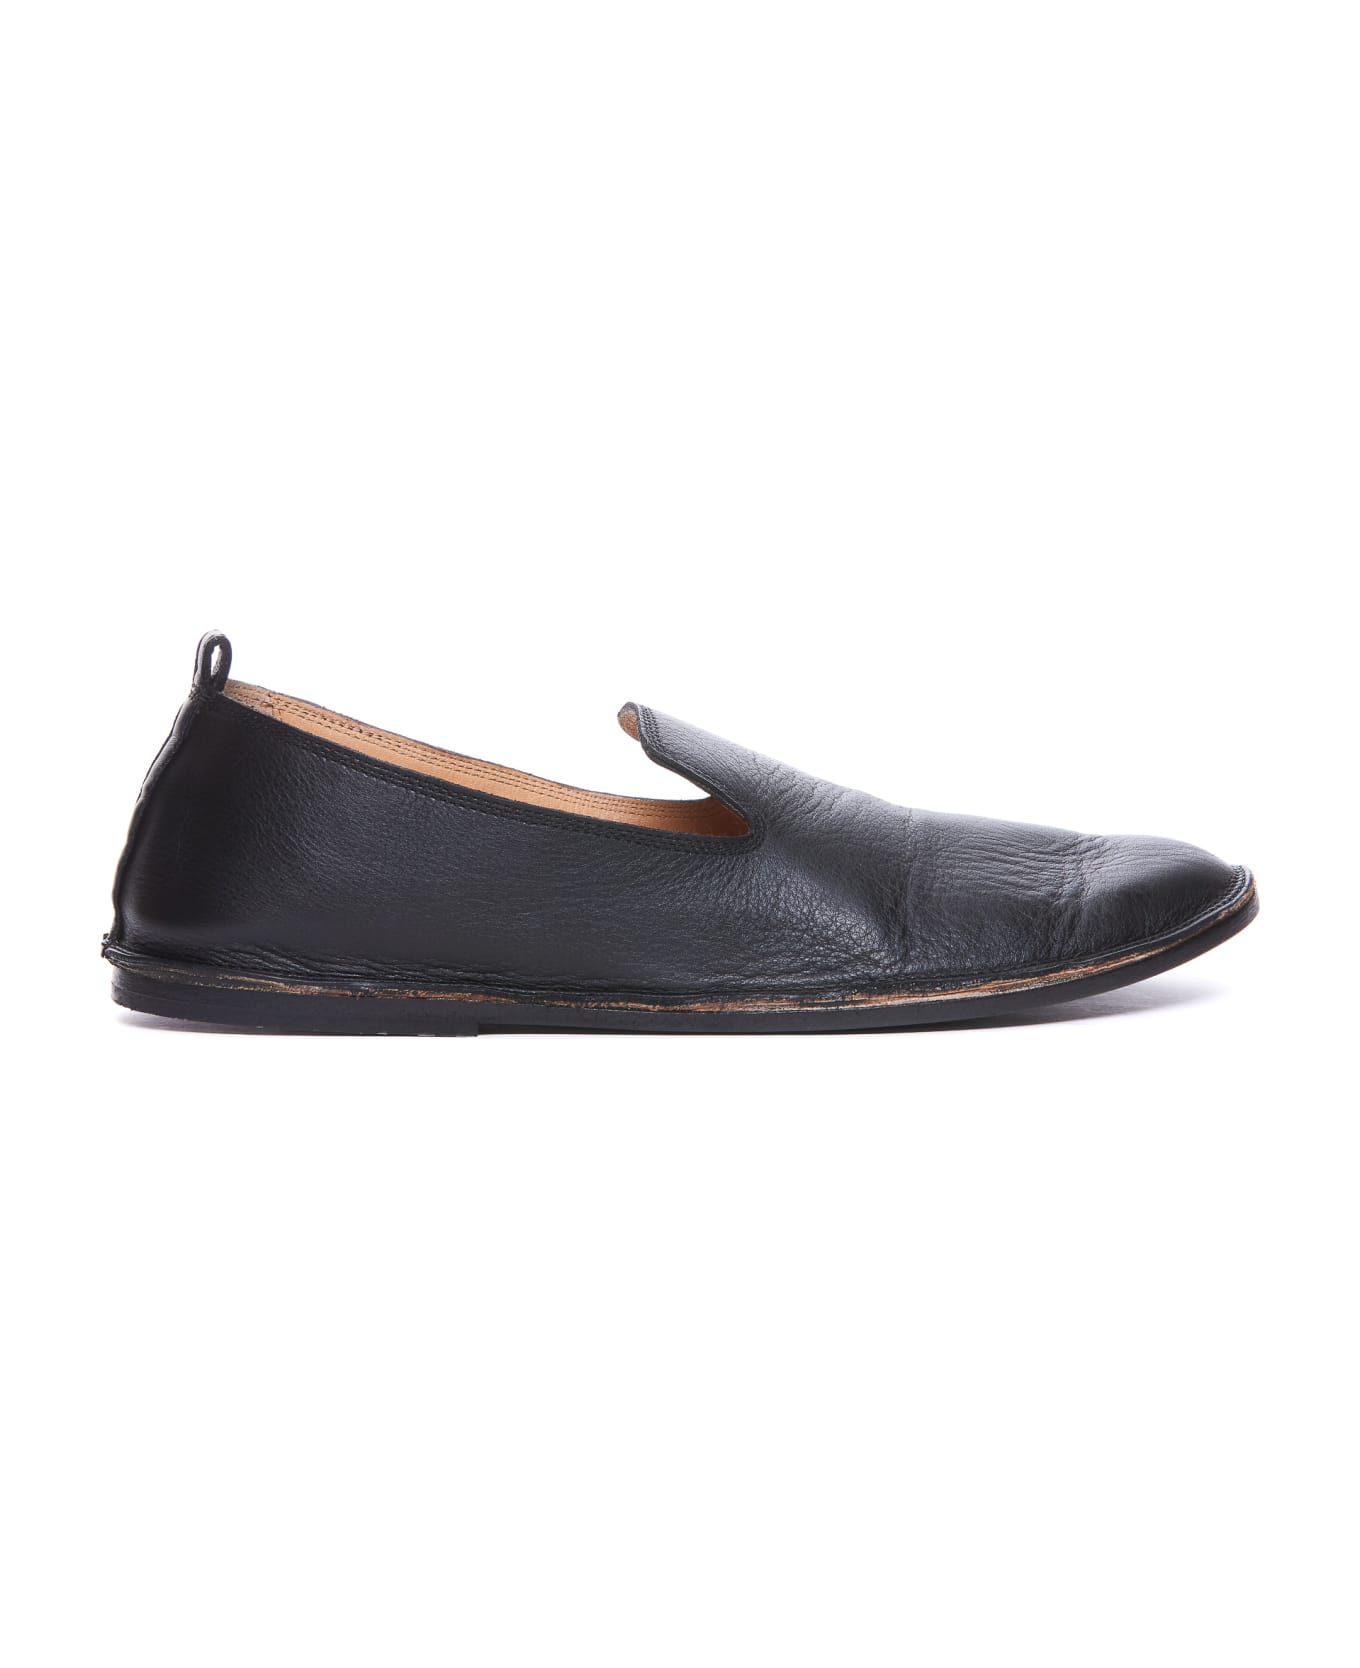 Marsell Strasacco Slippers - Black